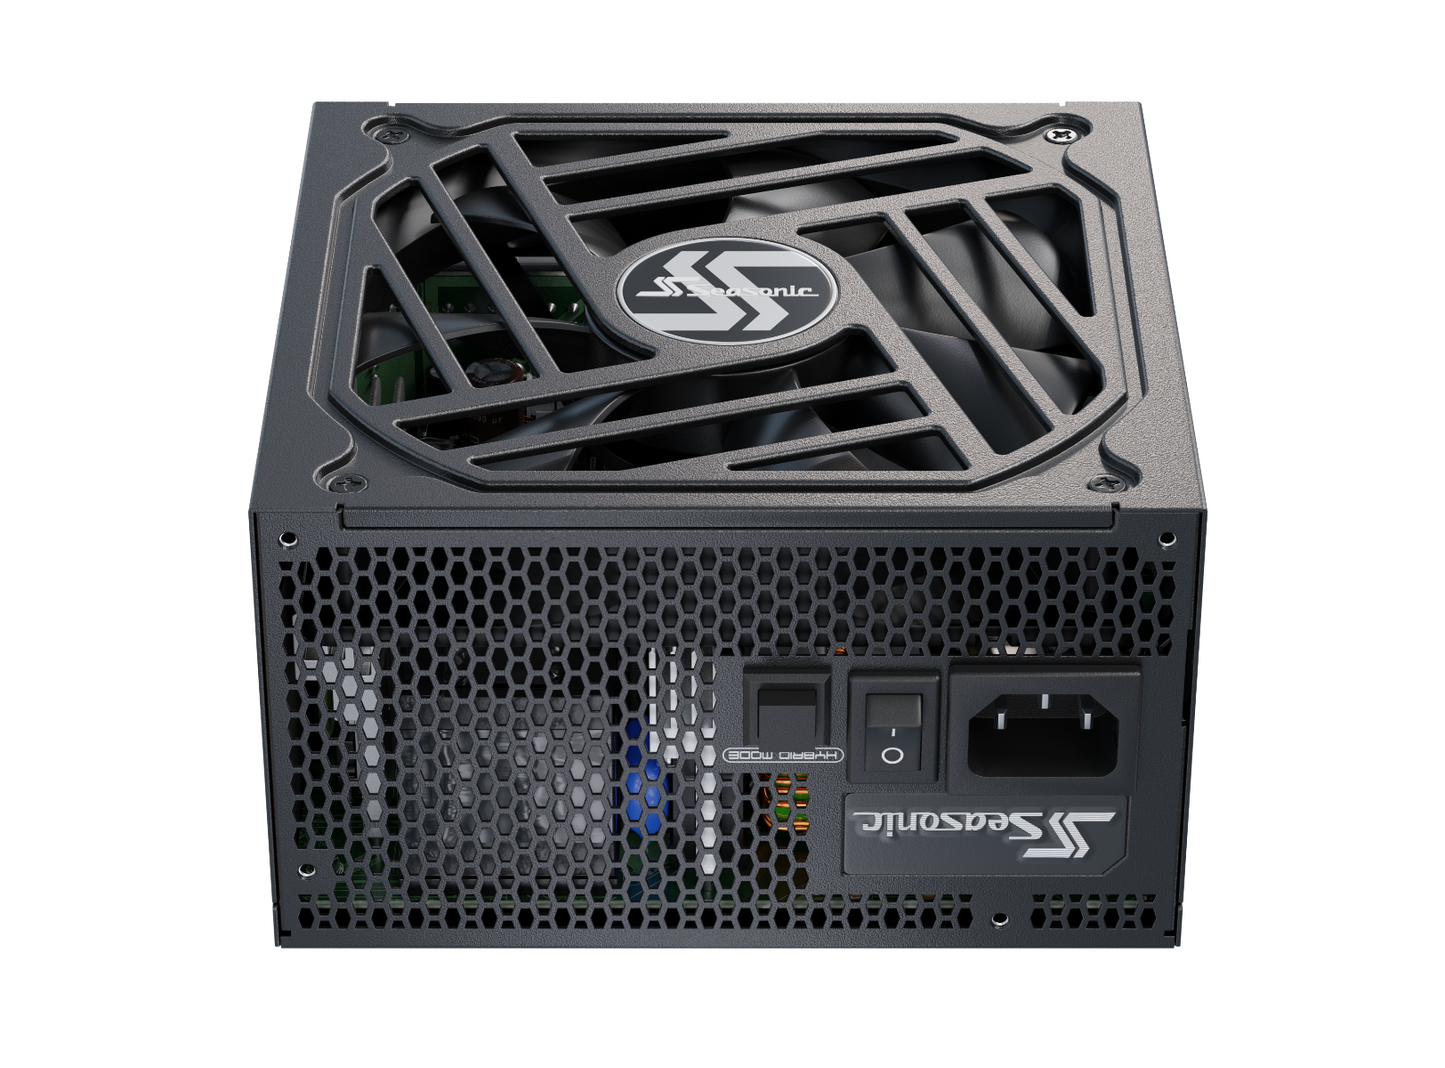 Seasonic FOCUS GX 750 850 1000 750W 850W 1000W ATX3.0 80+ Gold, Full-Modular, Fan Control in Fanless, Silent, and Cooling Mode, Perfect Power Supply for Gaming and Various Application